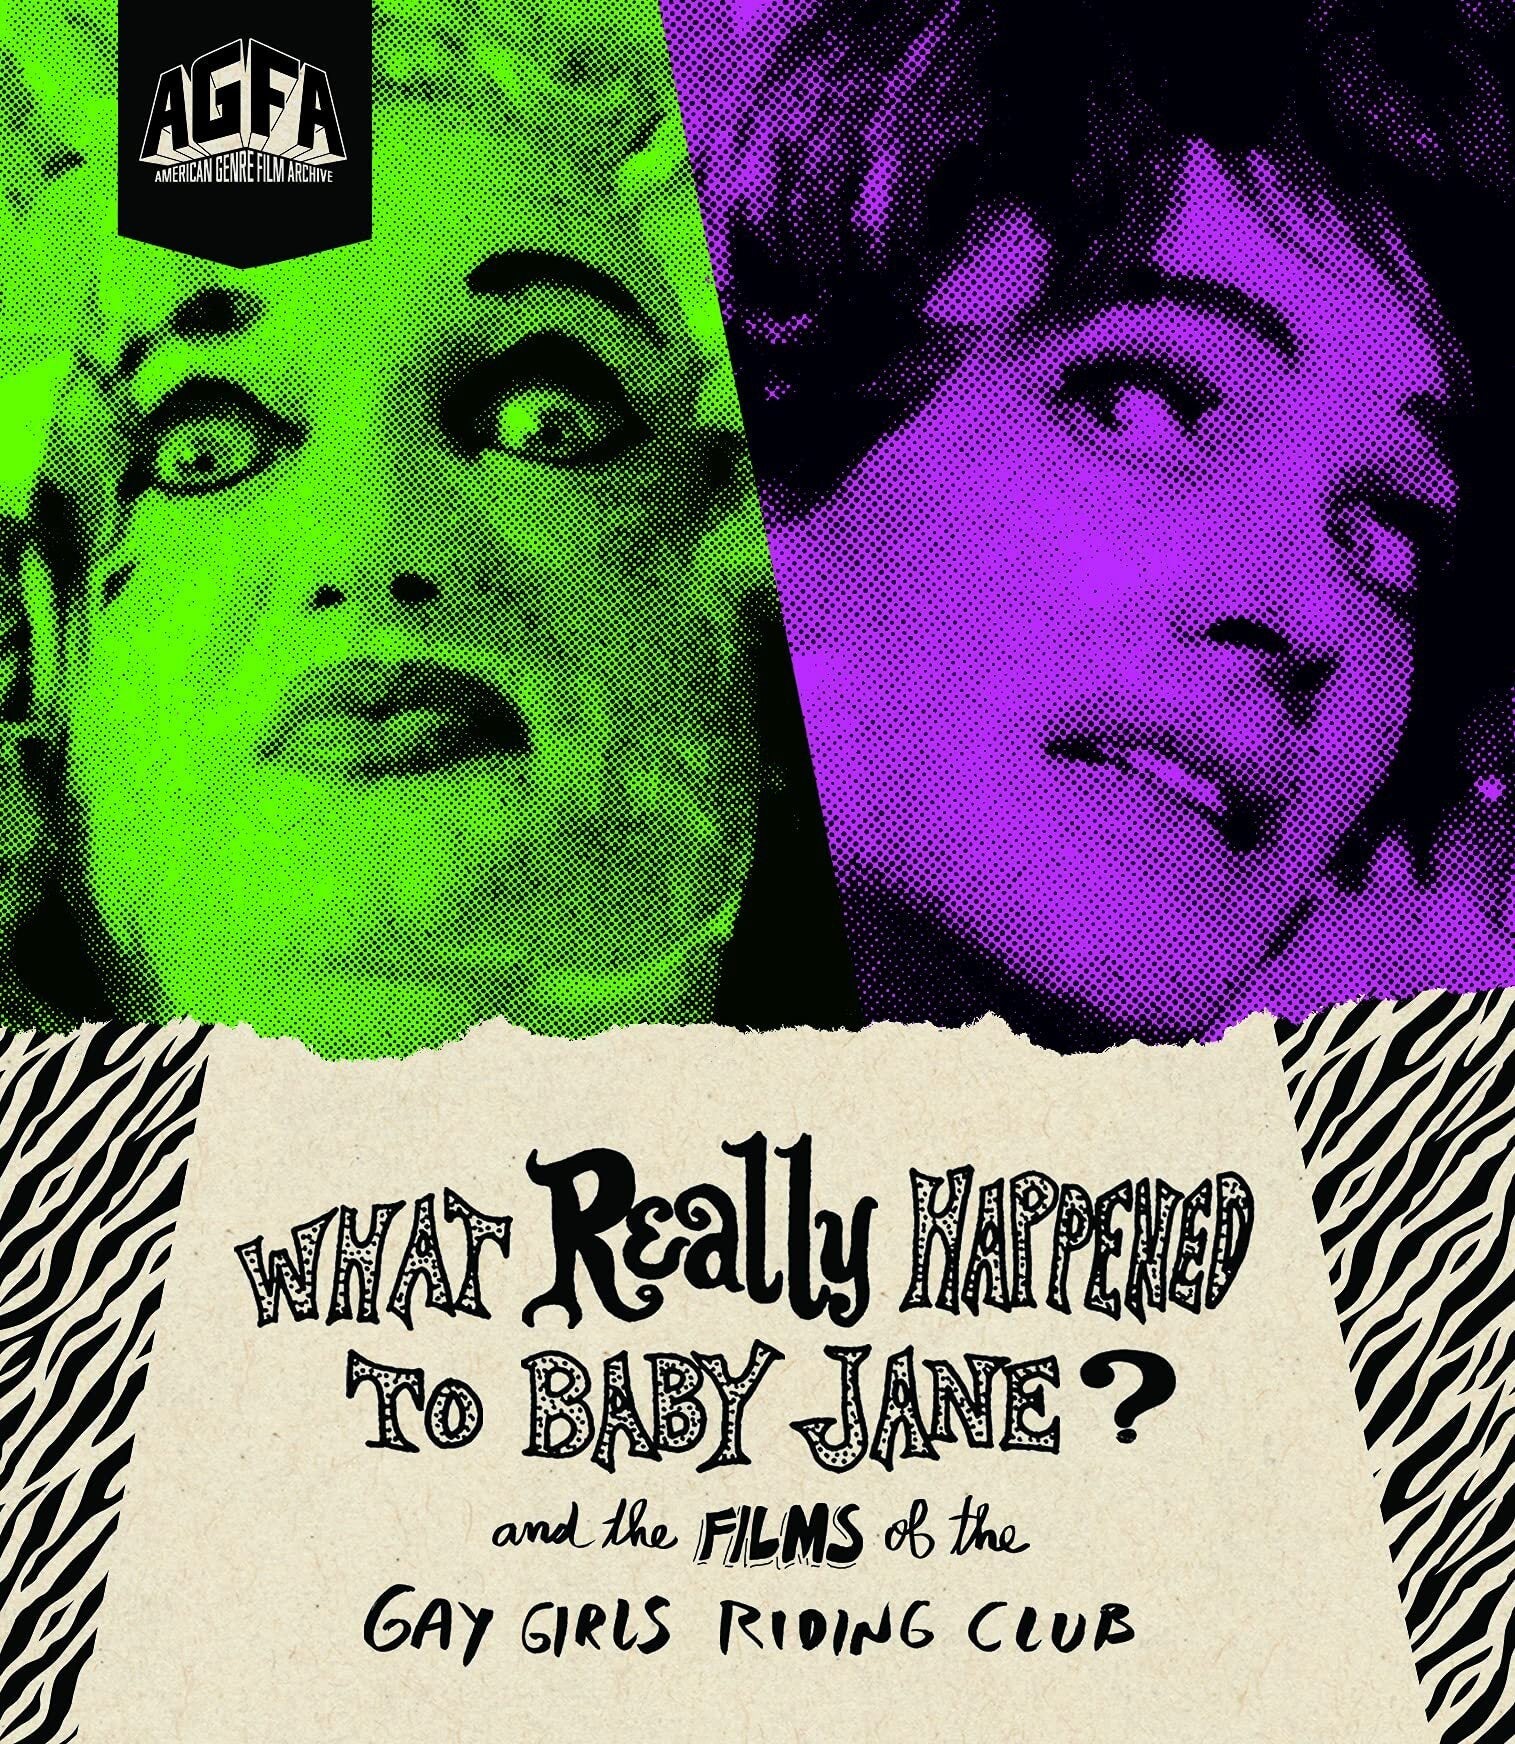 What Really Happened To Baby Jane And The Films Of Gay Girls Riding Club Blu-Ray Blu-Ray